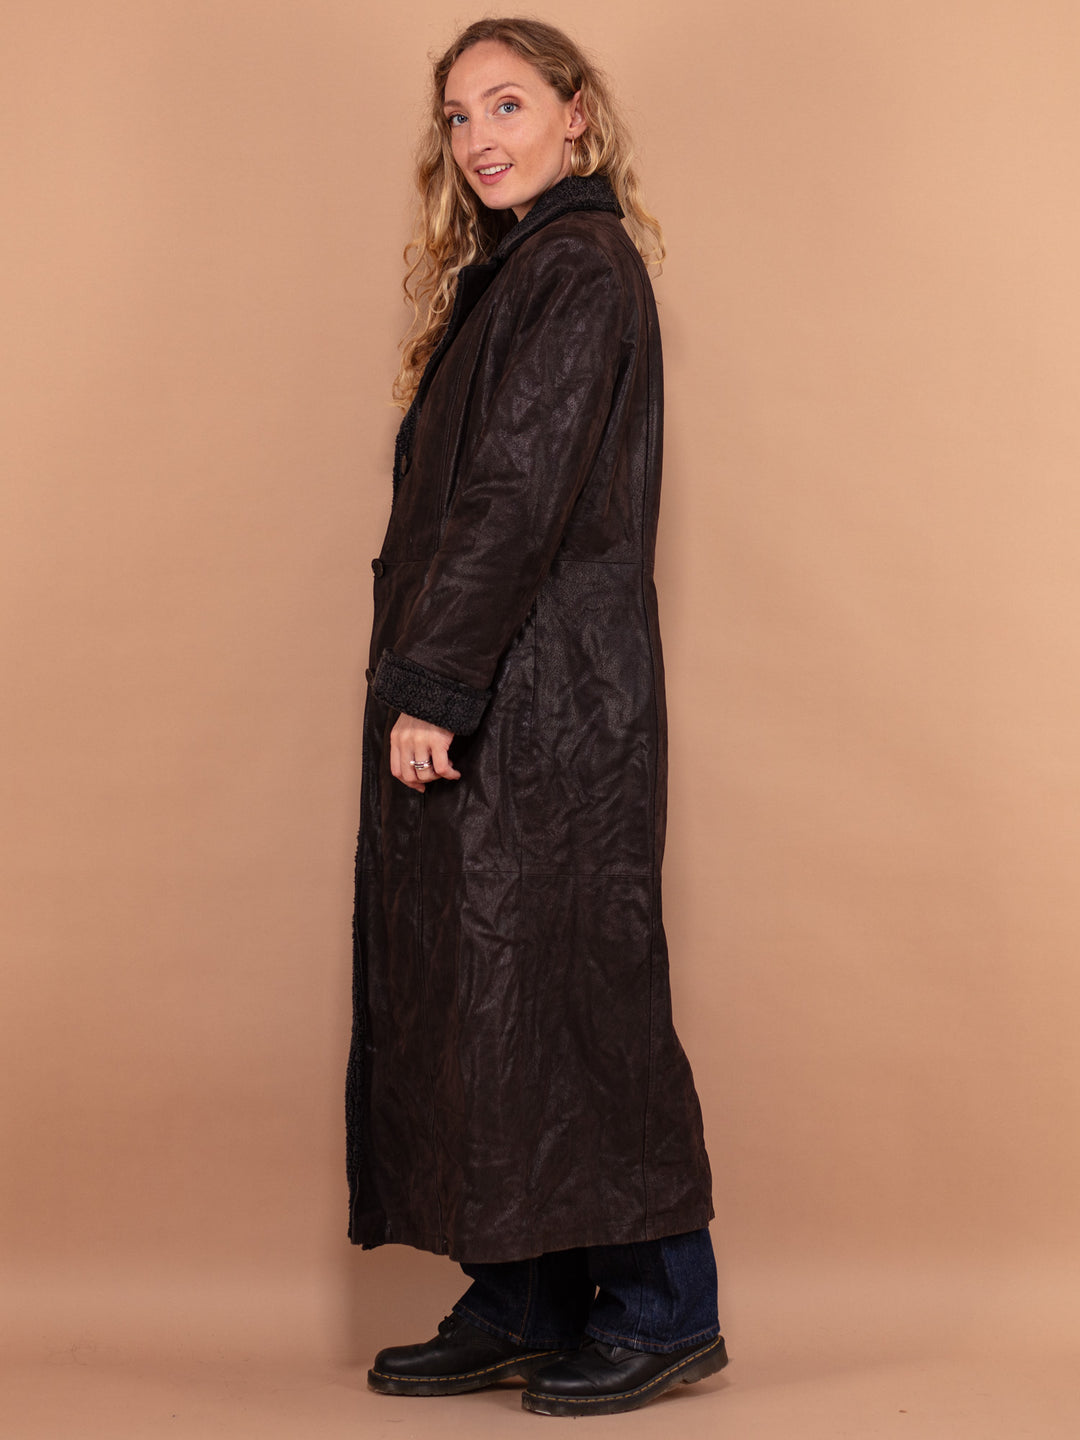 Leather Sherpa Coat 90s, Size Medium Brown Leather Coat, Sherpa Leather Coat, Vintage Leather Maxi Coat,  Retro Leather Coat, 90s Outerwear,